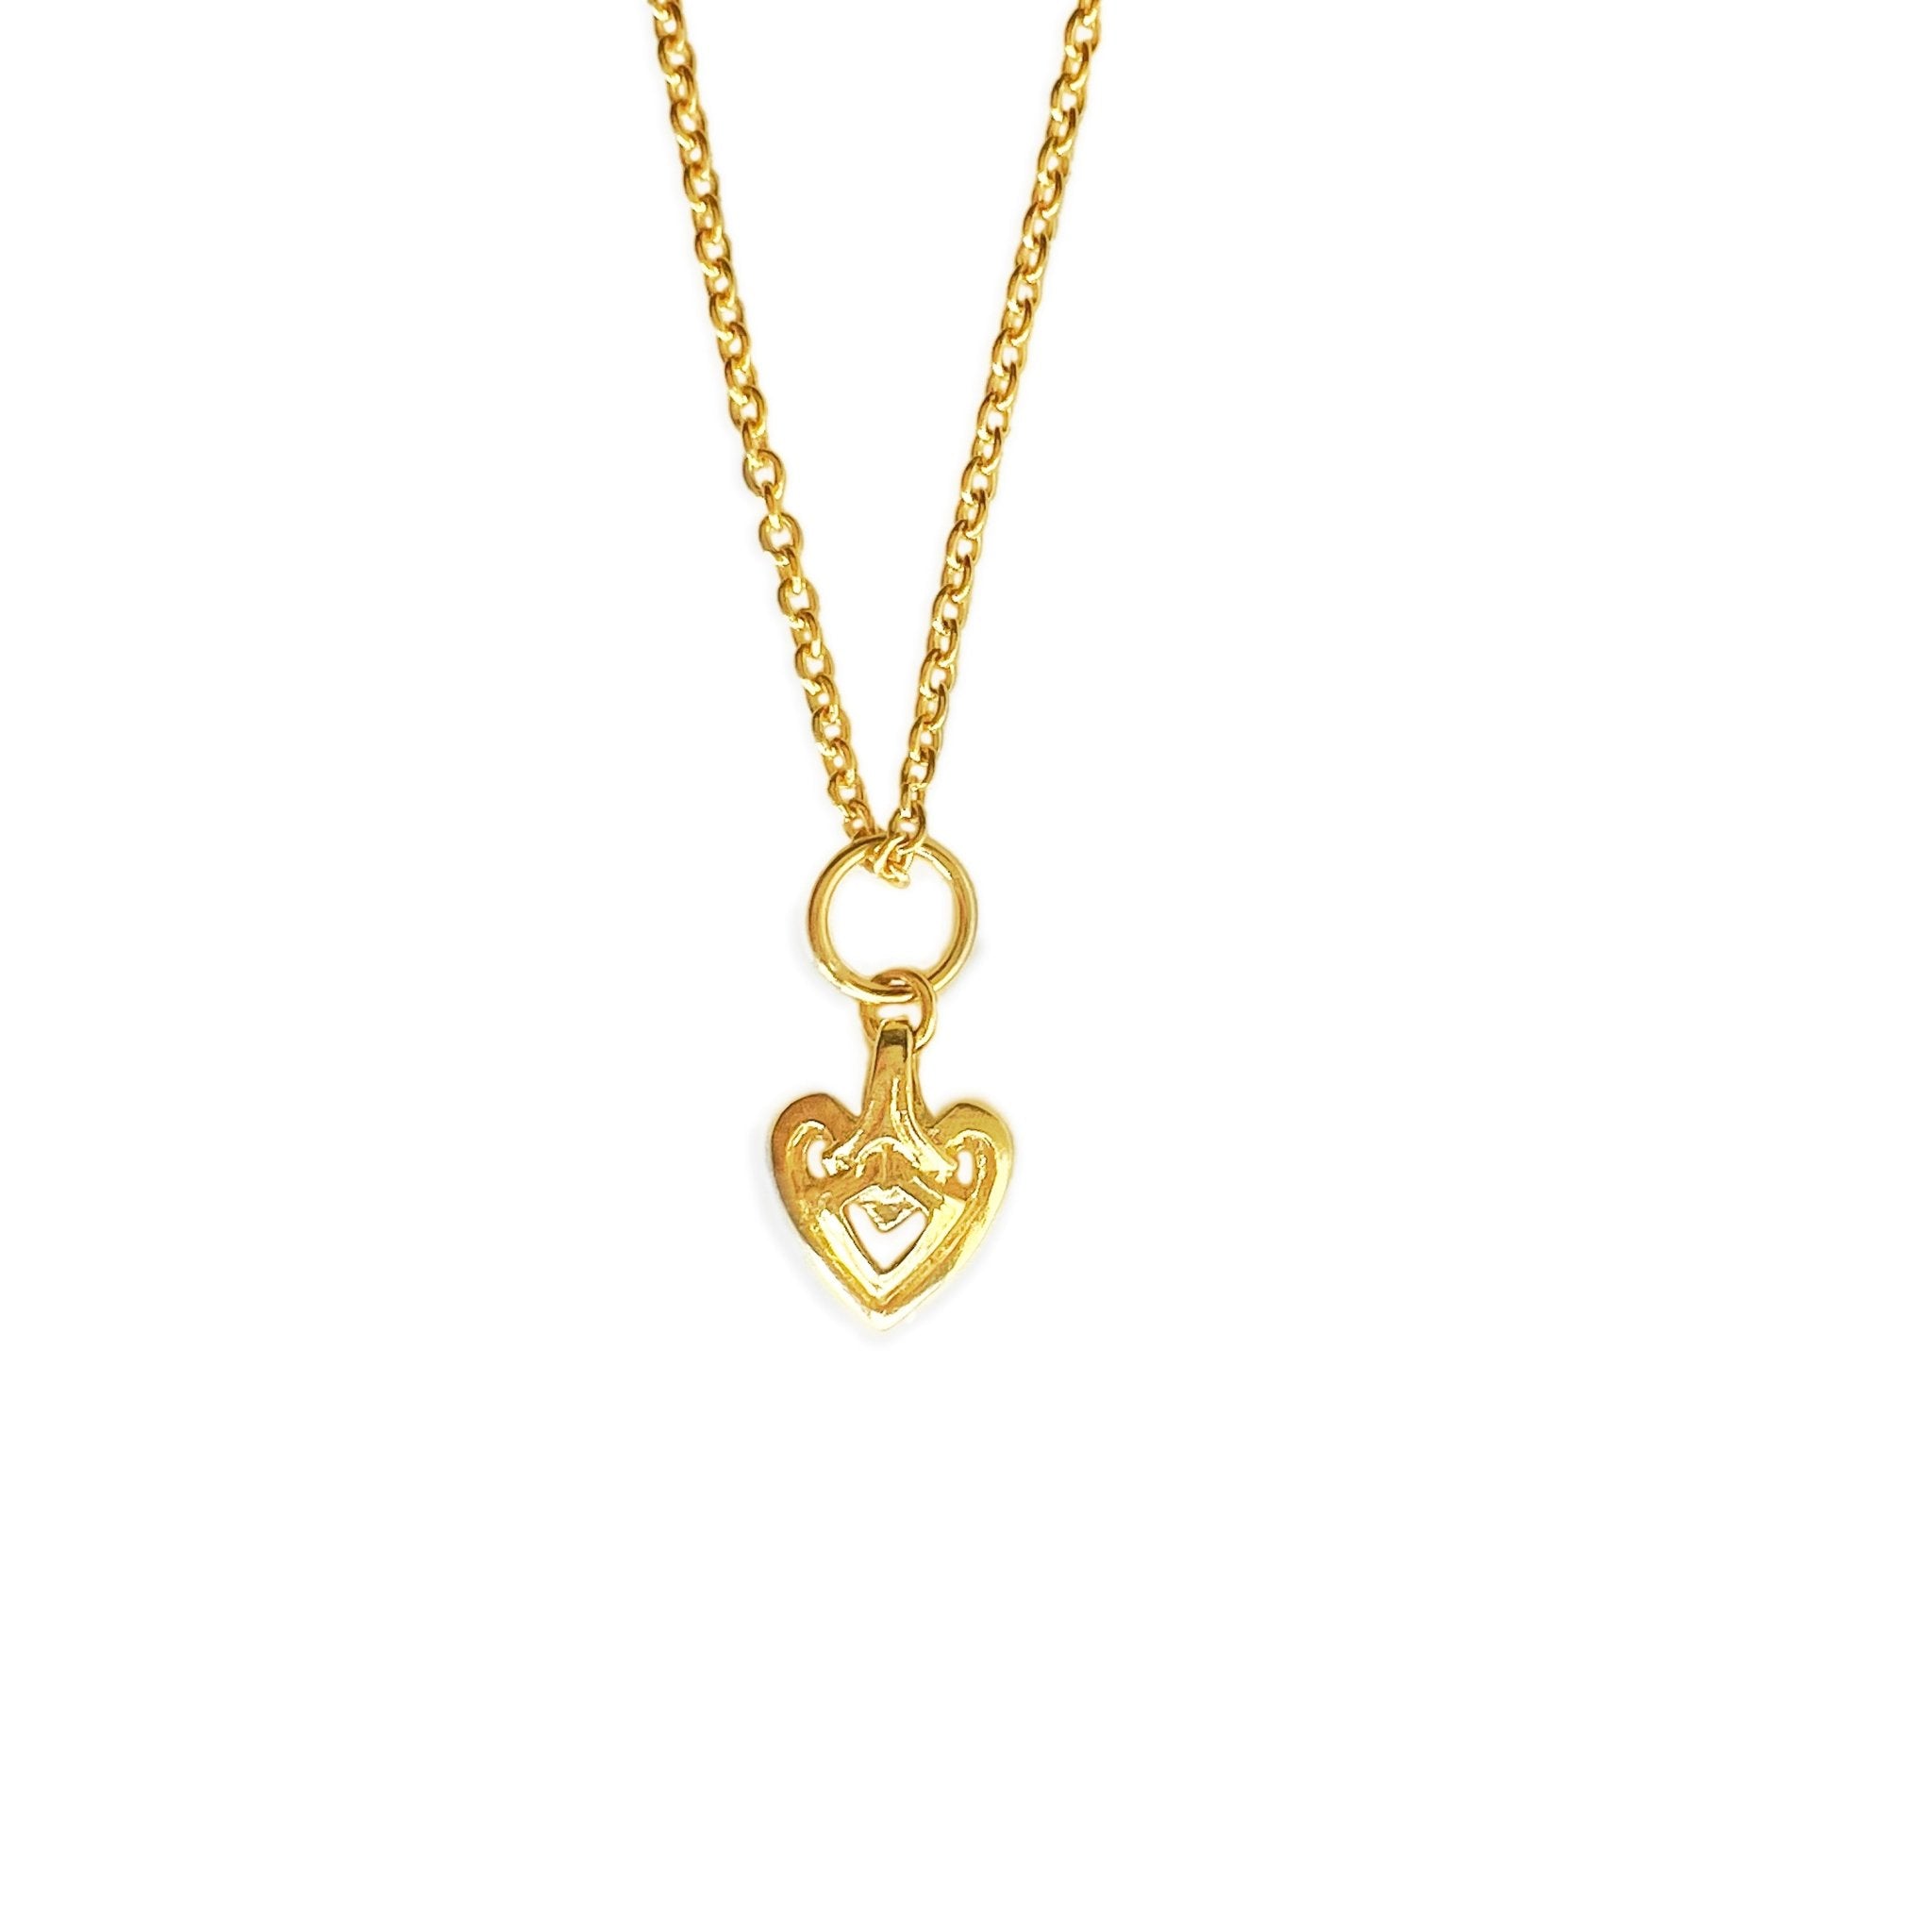 Astor & Orion Wise Heart Gold Charm Necklace - Gold